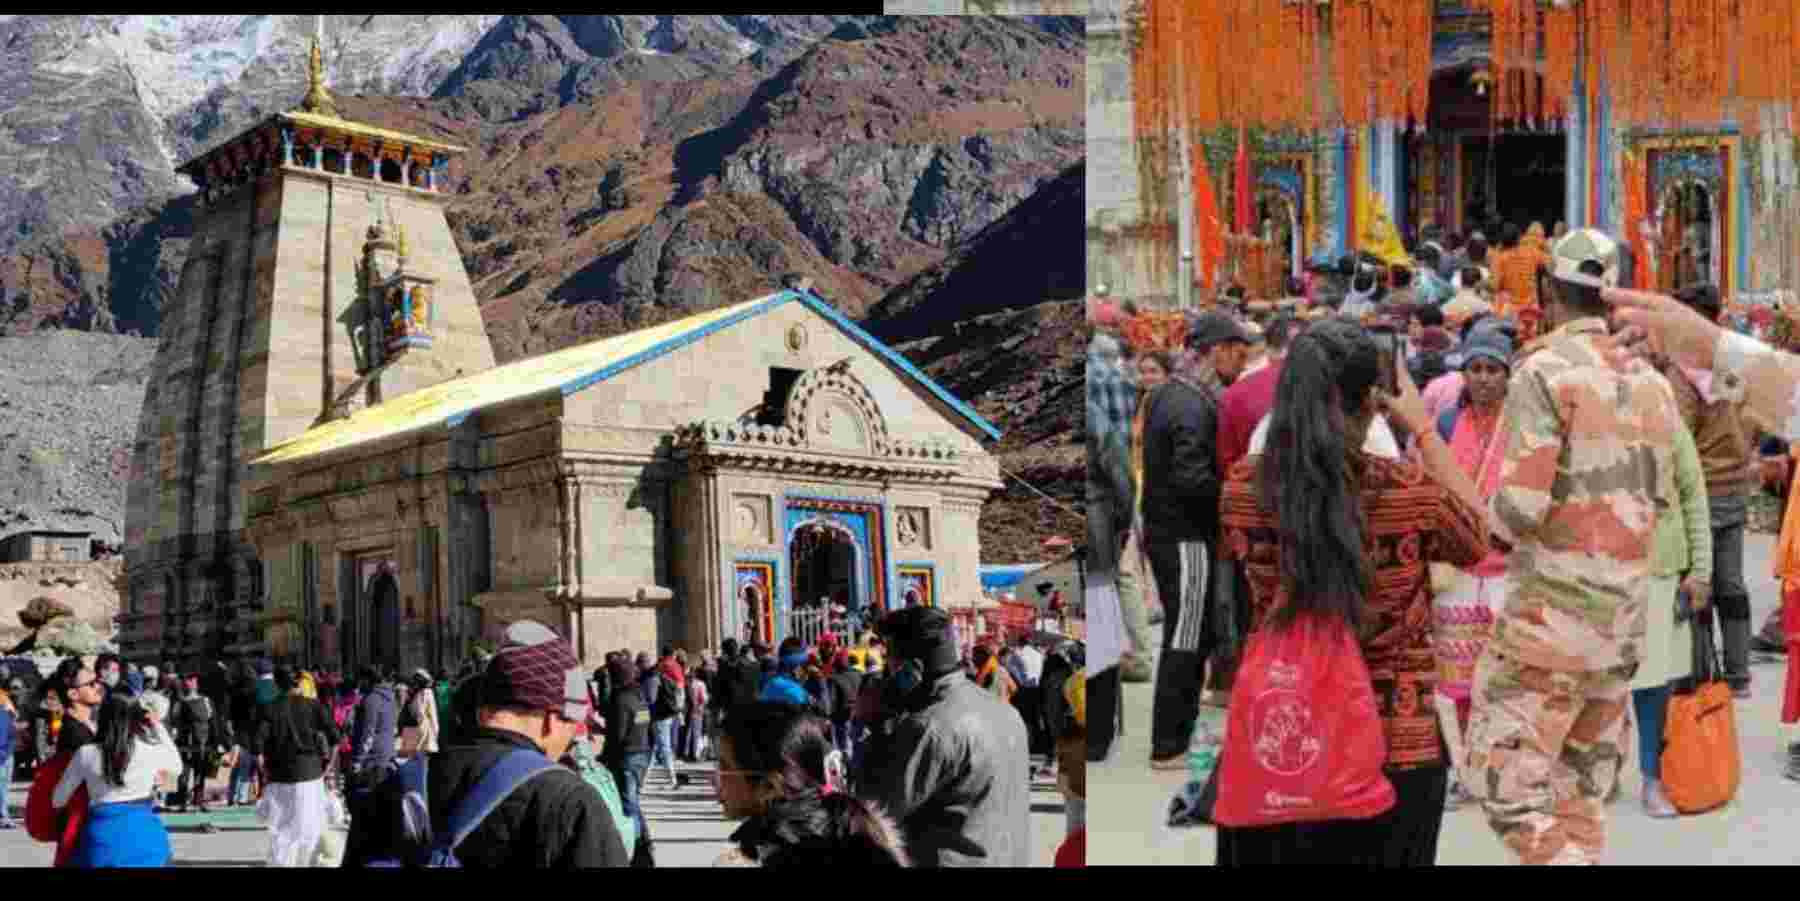 Uttarakhand news: Now mobile and electronic devices will not be able to be taken to Kedarnath Dham mobile ban